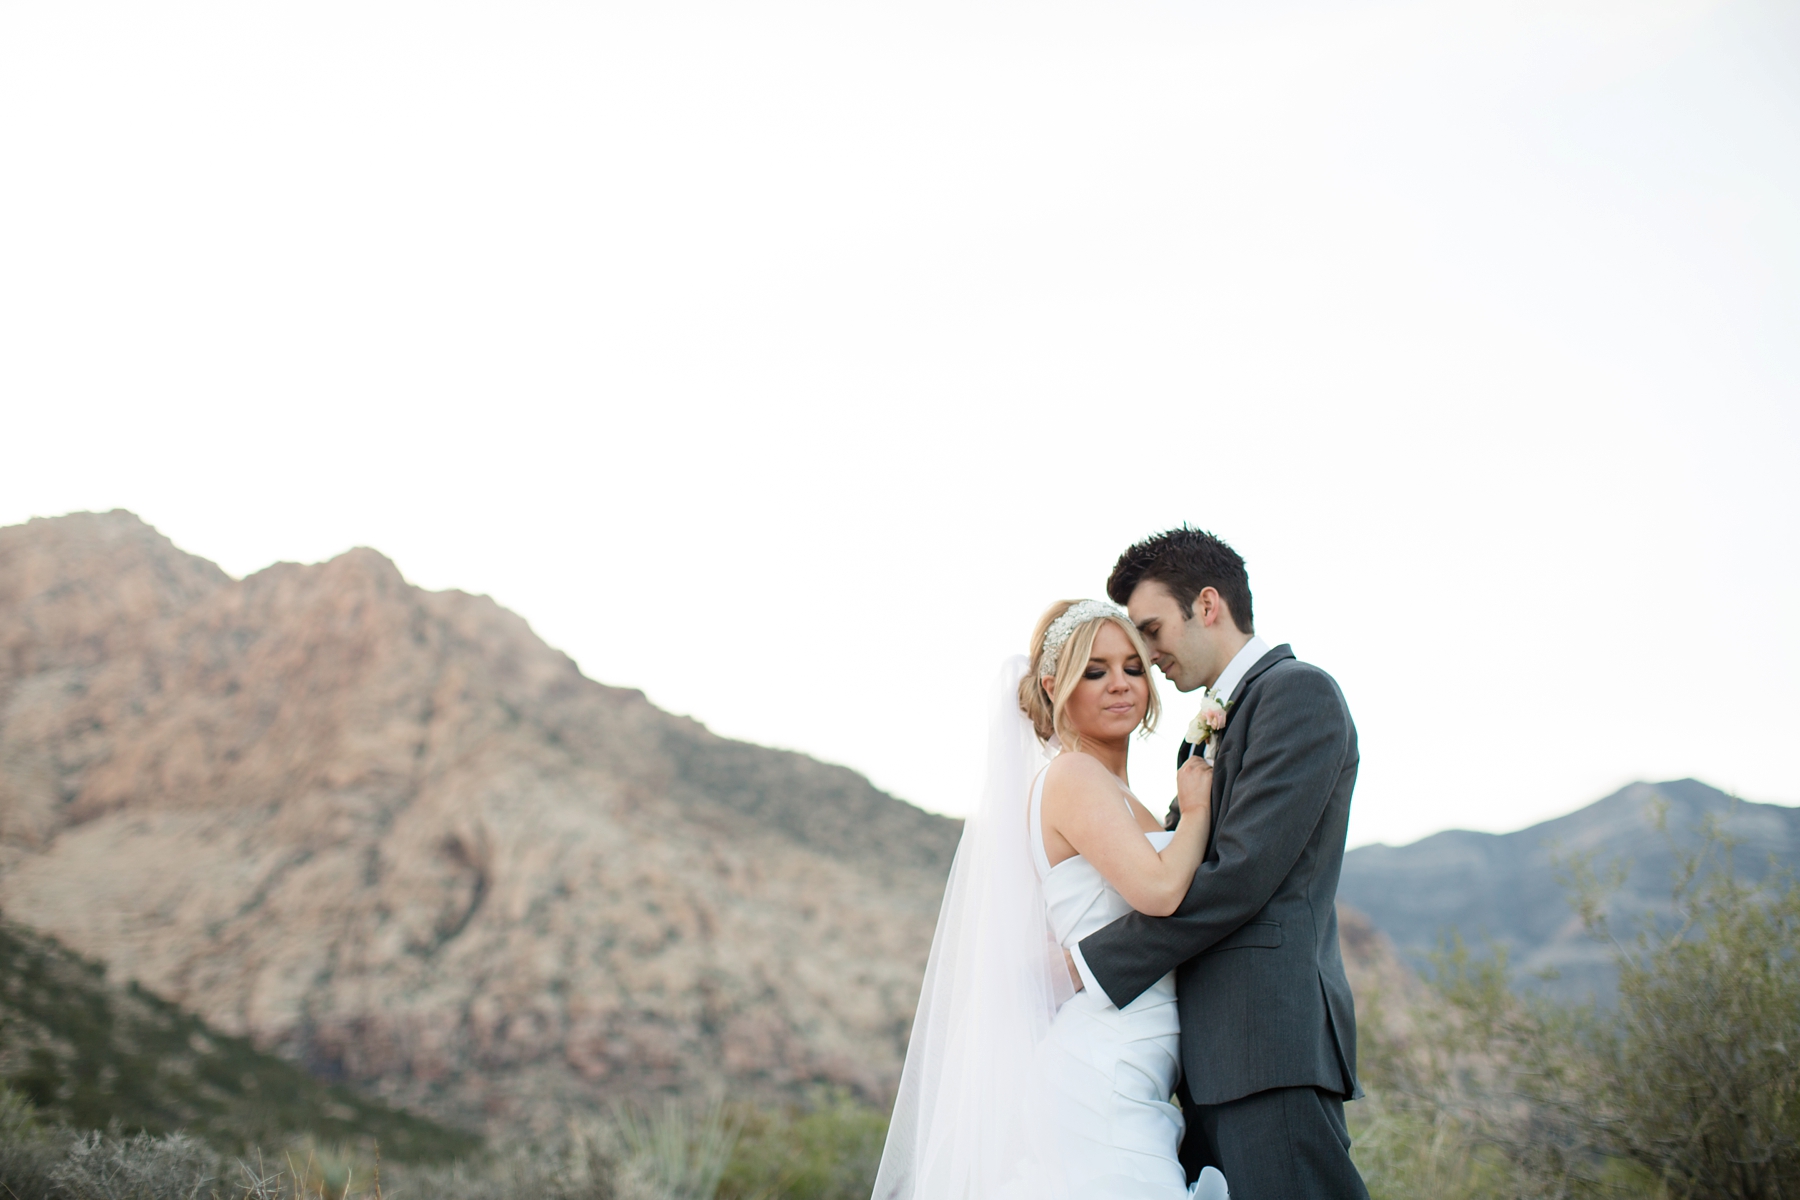 Bride and groom portrait in desert by Elle Danielle Photography